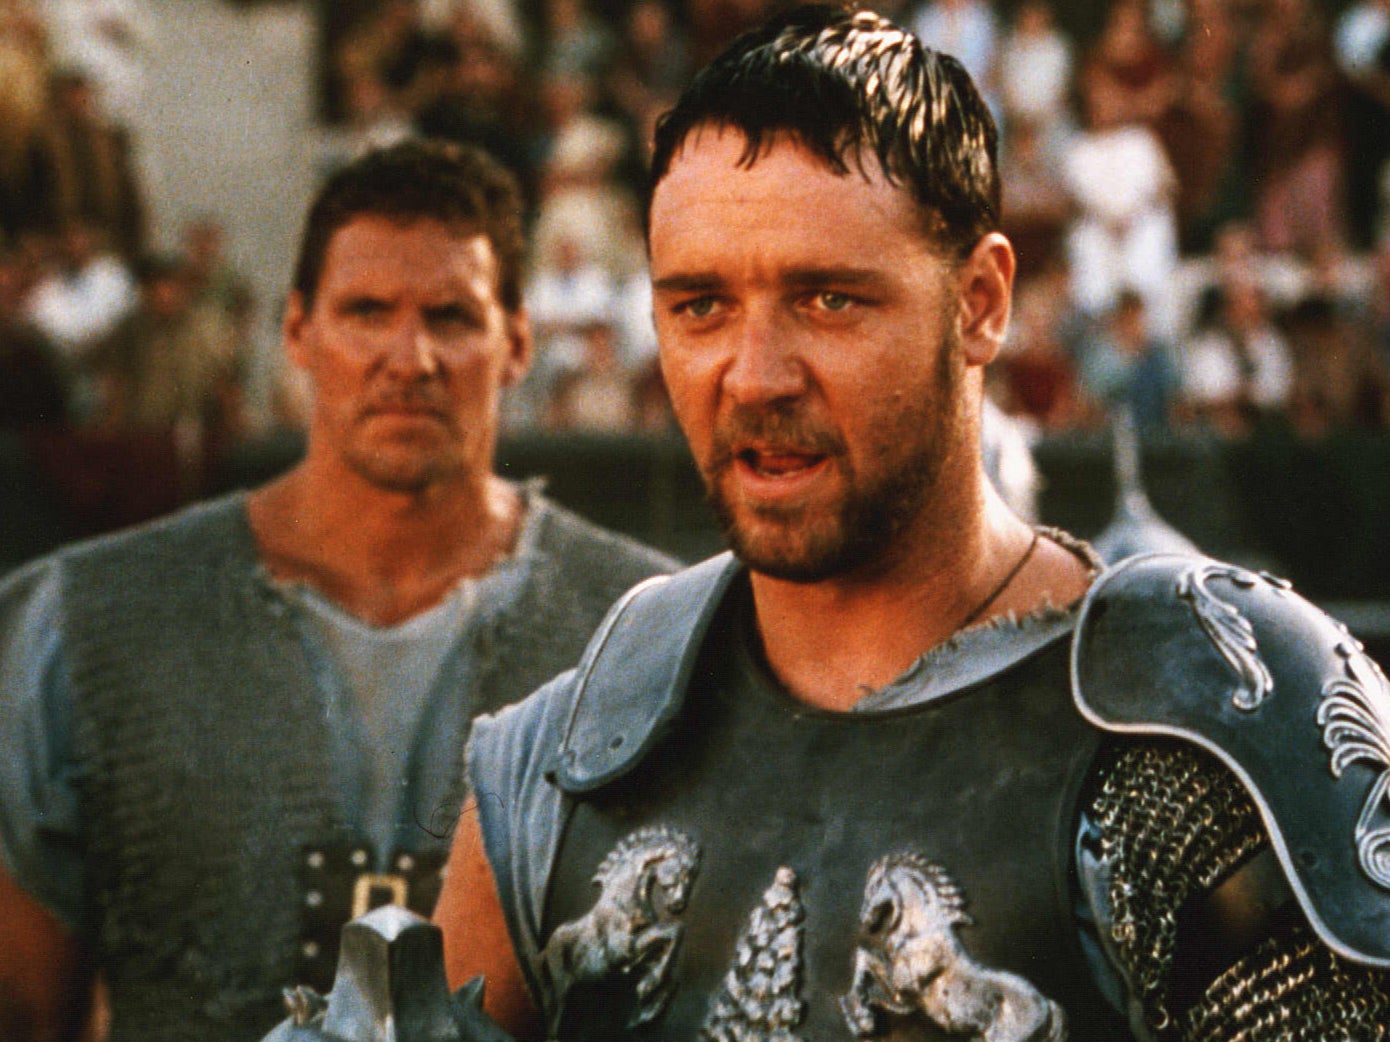 Russell Crowe Gladiator 2 Trailer